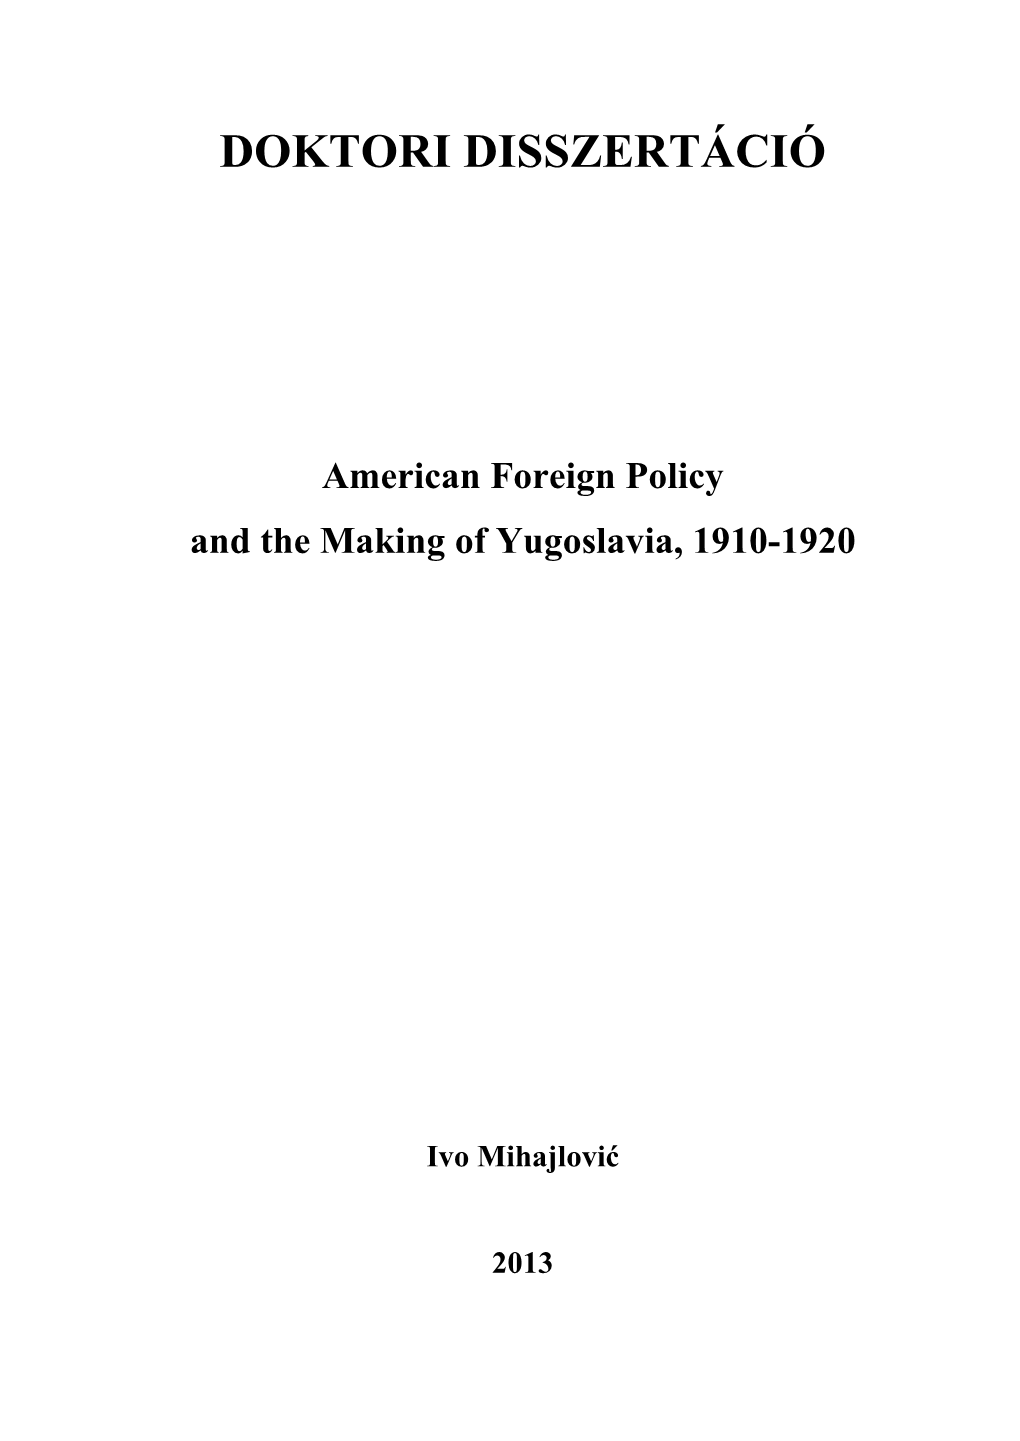 American Foreign Policy and the Making of Yugoslavia, 1910-1920